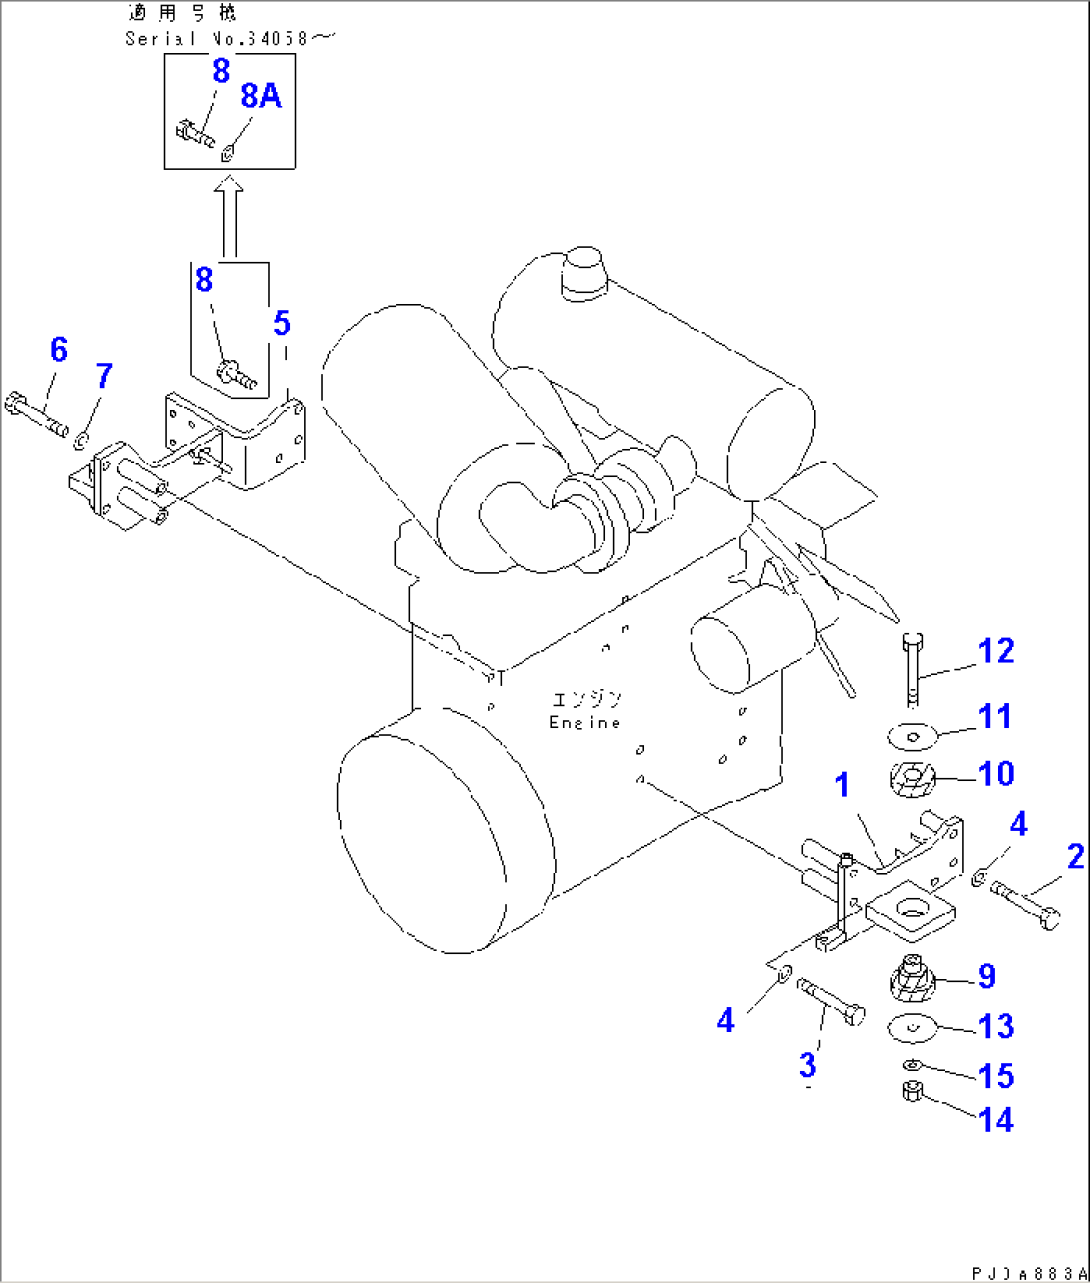 ENGINE MOUNTING PARTS